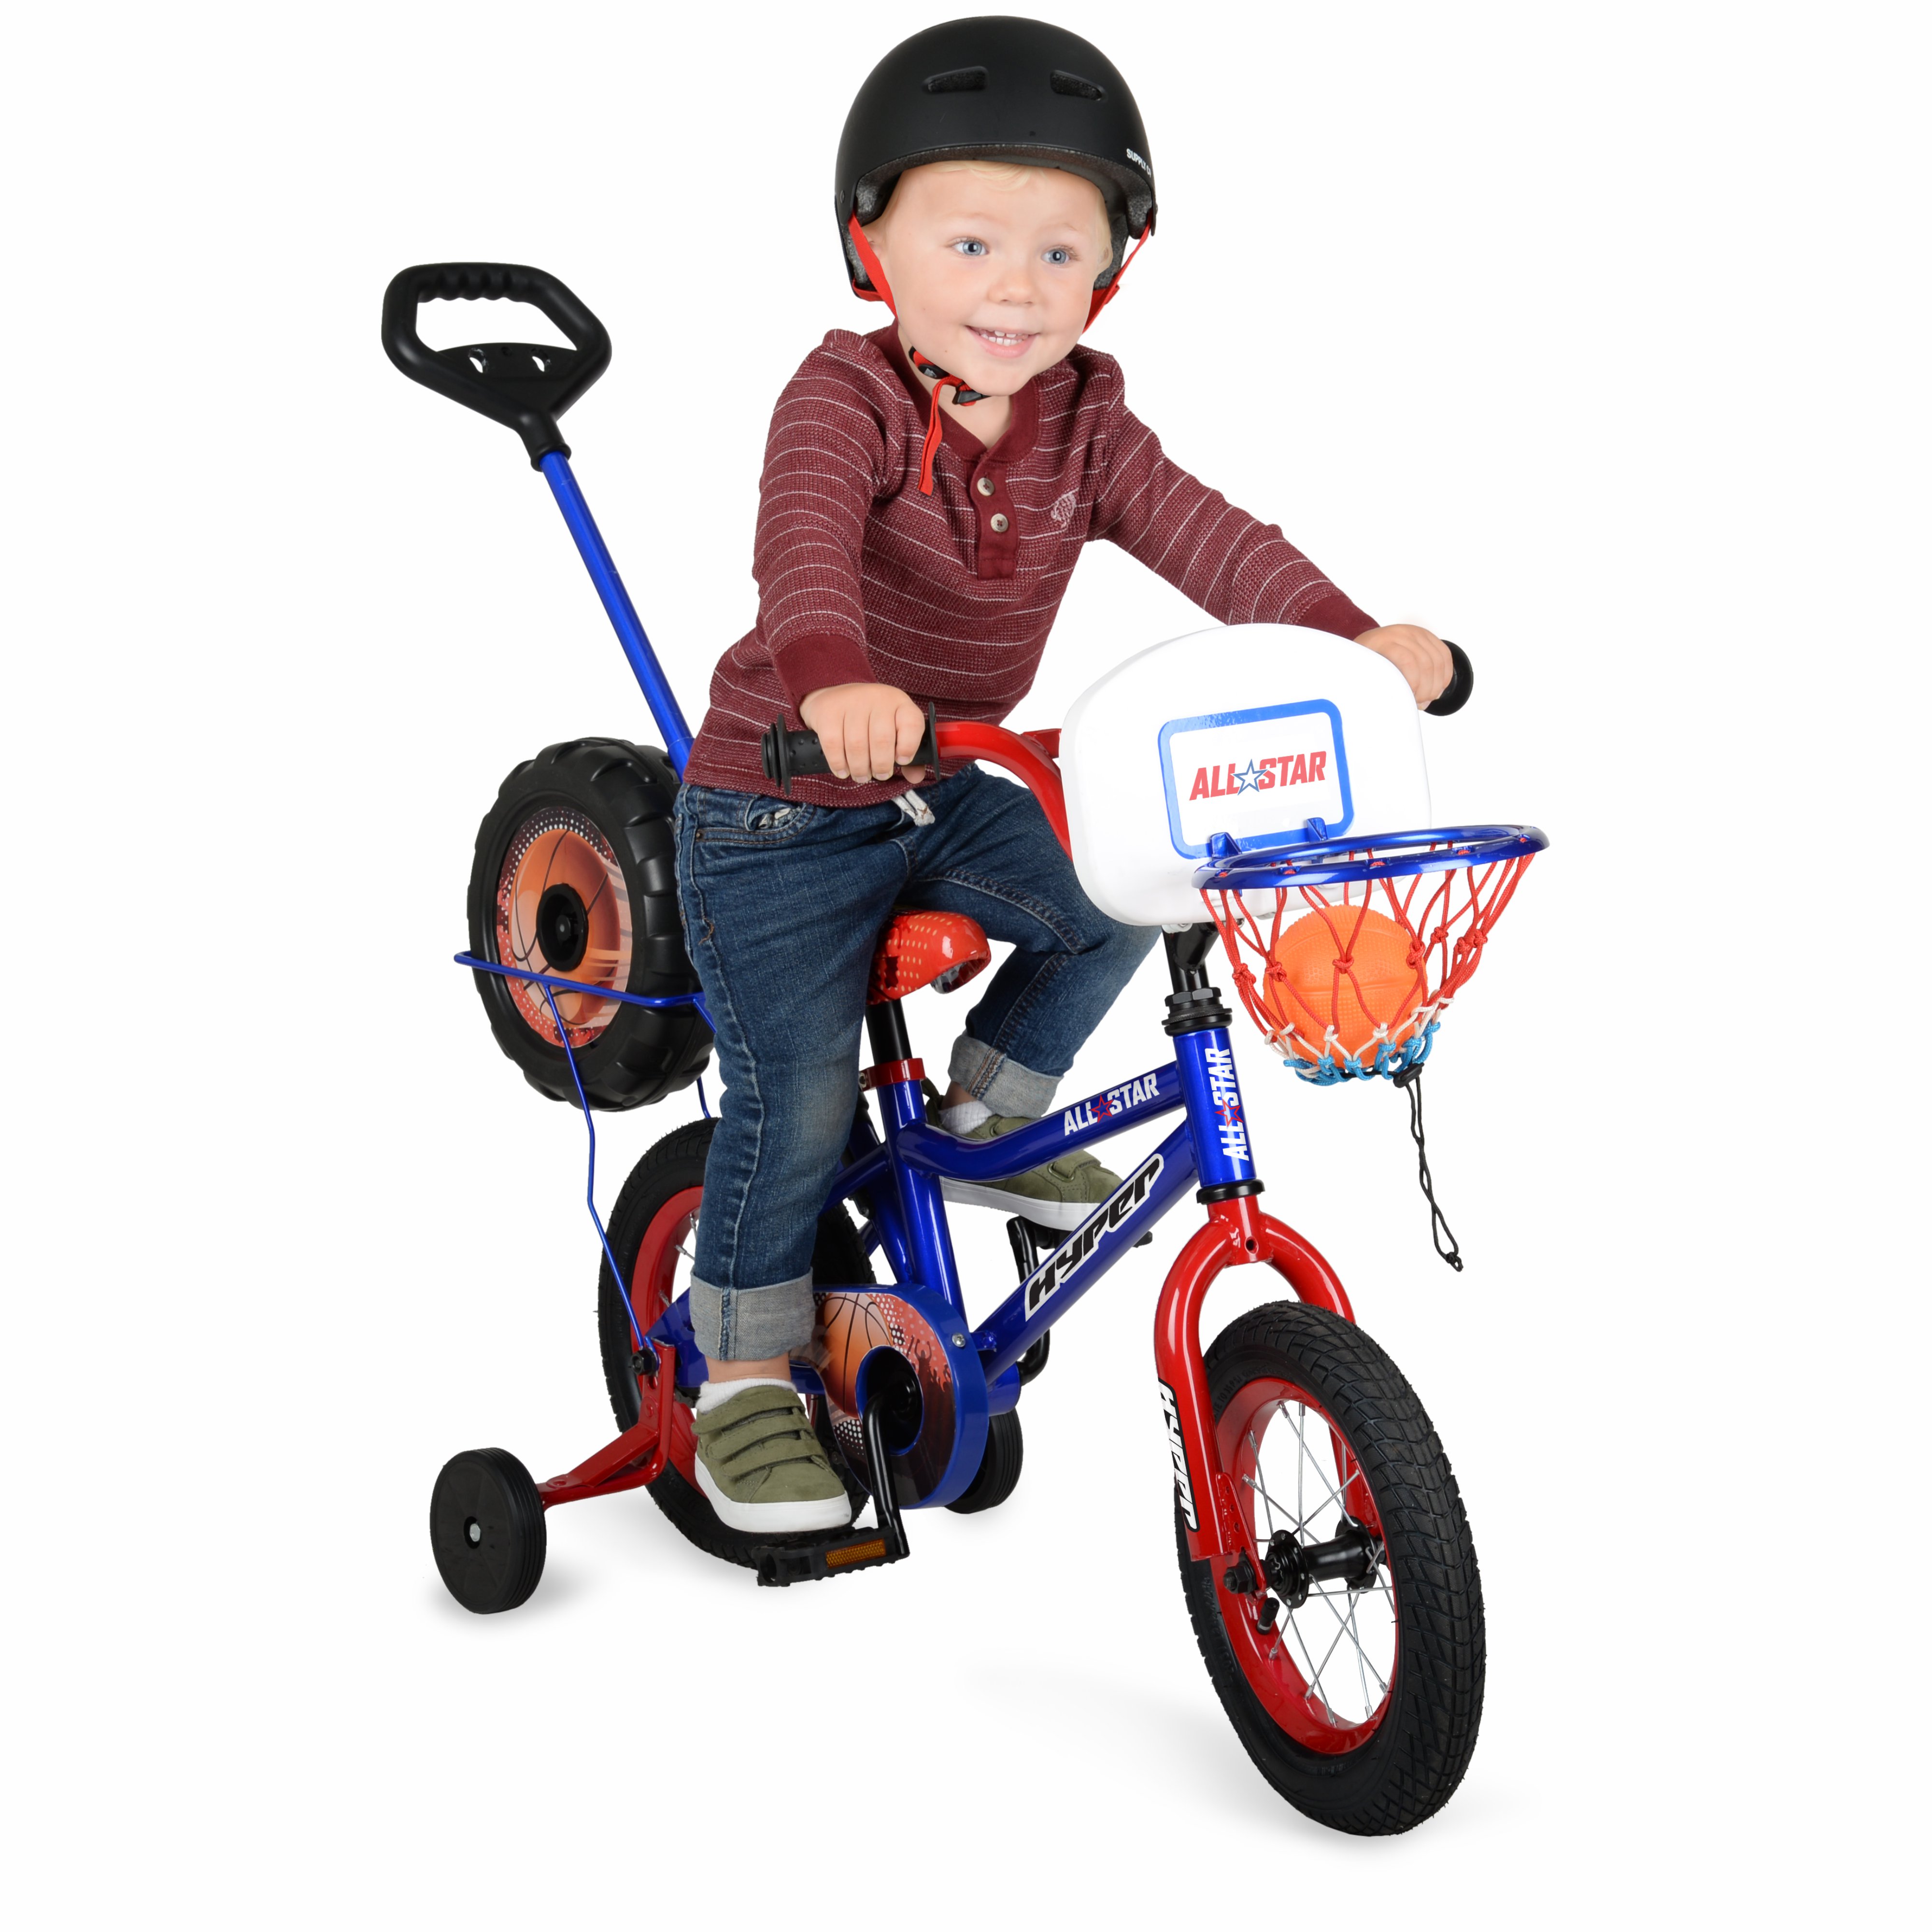 Hyper Bicycles 12" All Star Basketball Bike, with Training Wheels, for Kids Ages 3-5 Years, Basketball Hoop - image 1 of 3